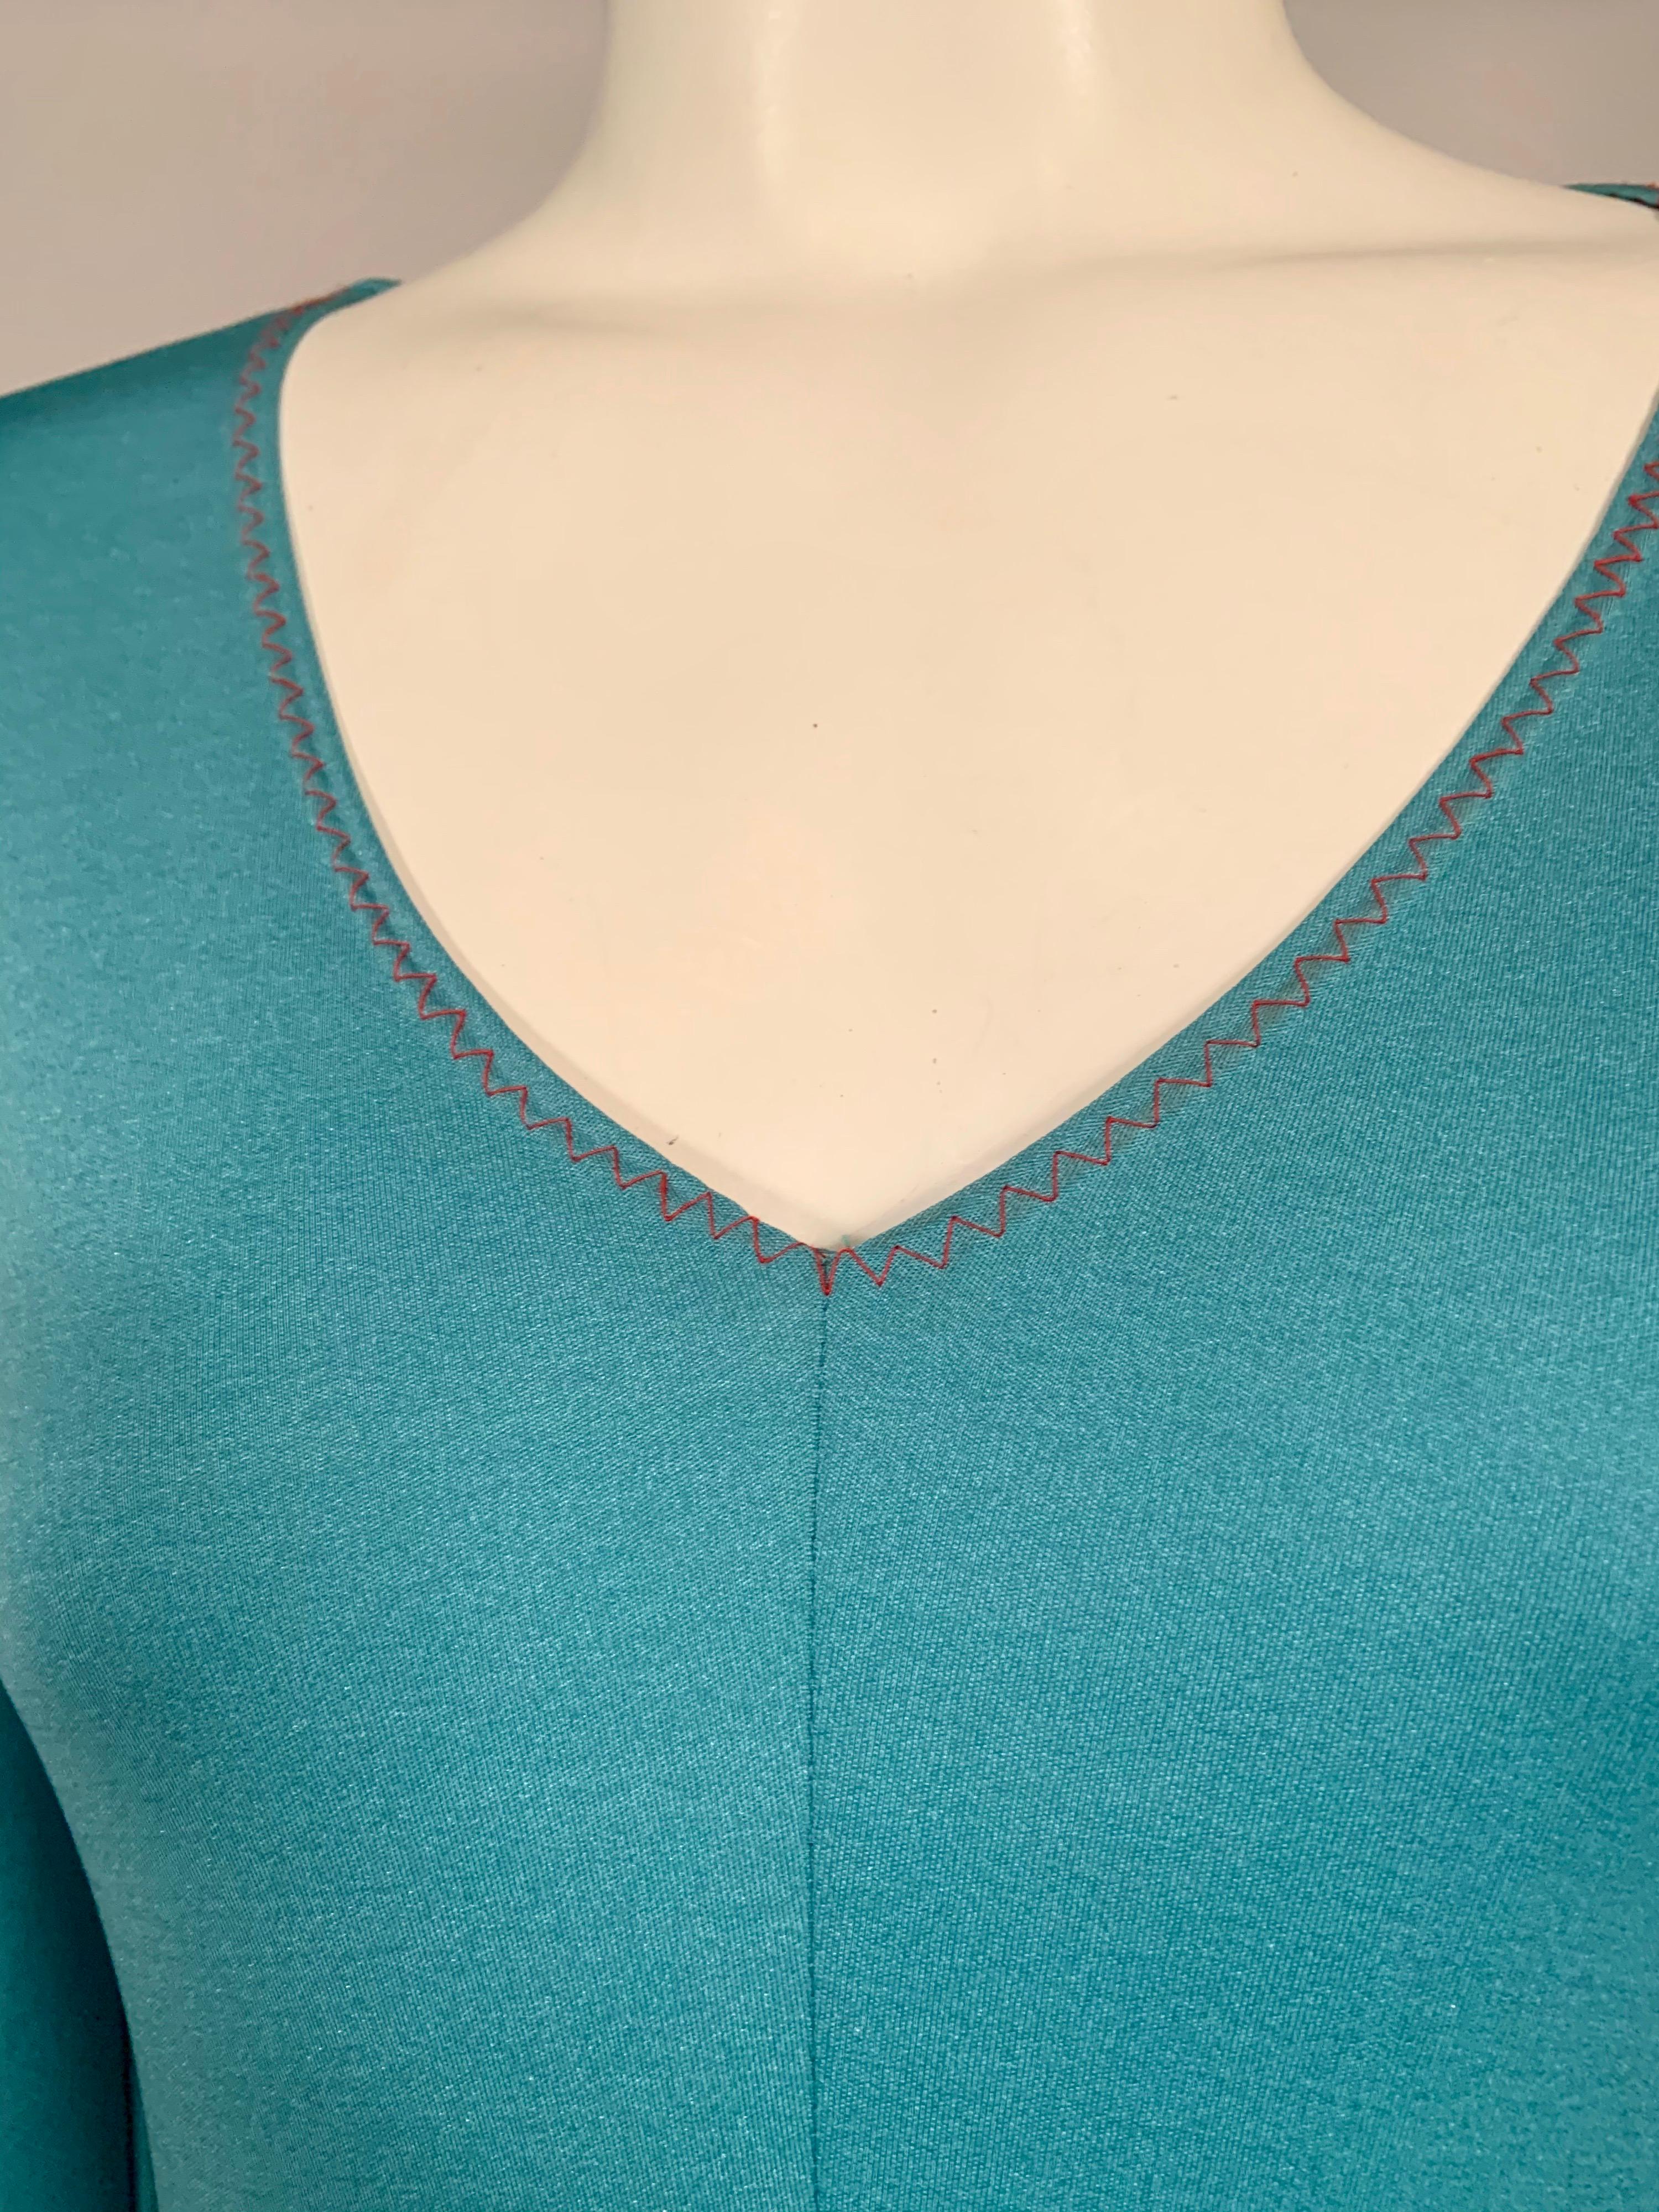 Stephen Burrows, an African American designer created this beautiful aqua blue jersey dress with his signature red zig zag stitching and lettuce edge hem in the 1970's for his lingerie line, Stevies. The clothes are feminine and sexy with a clingy